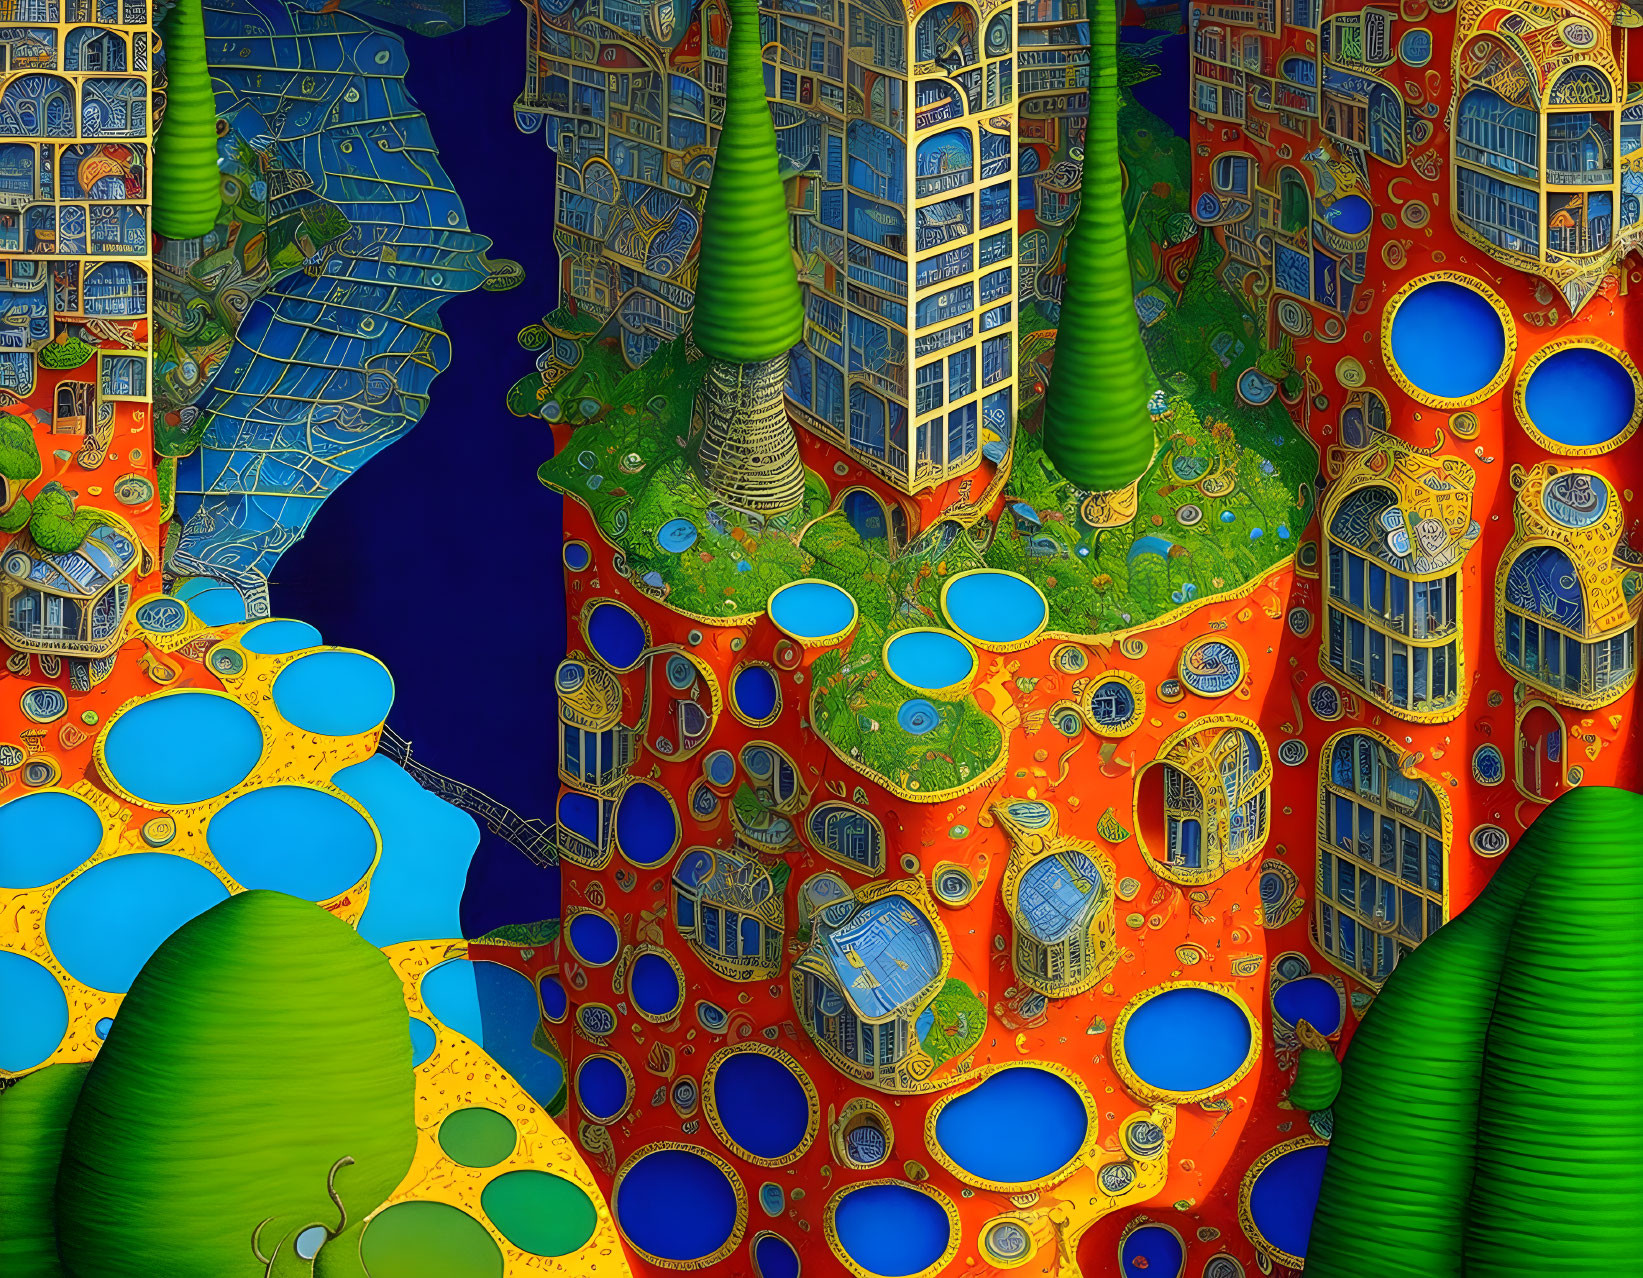 Colorful surreal artwork: structures, circular windows, green hills, blue water in intricate design